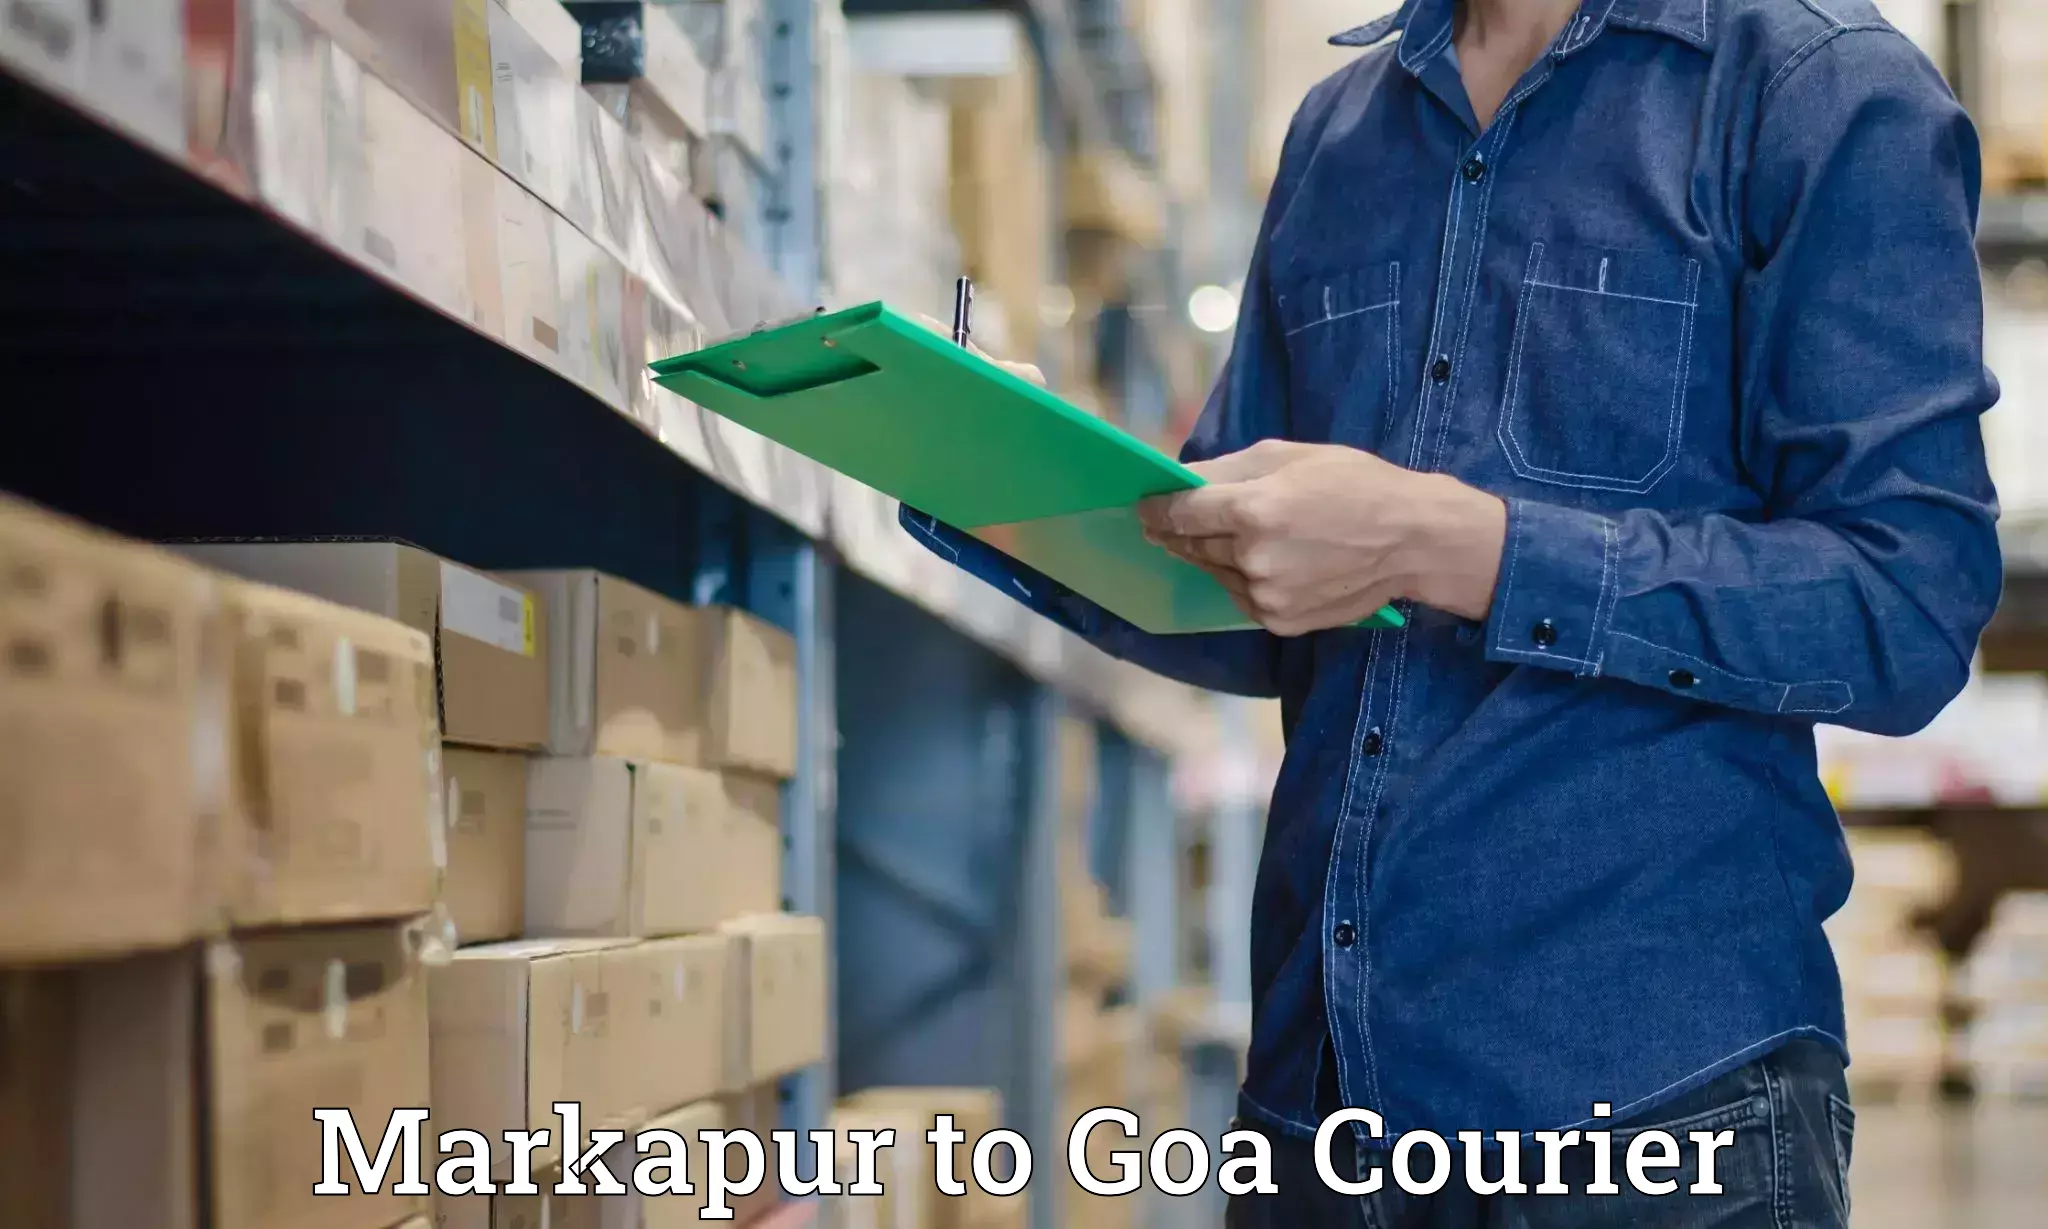 International courier networks Markapur to Margao